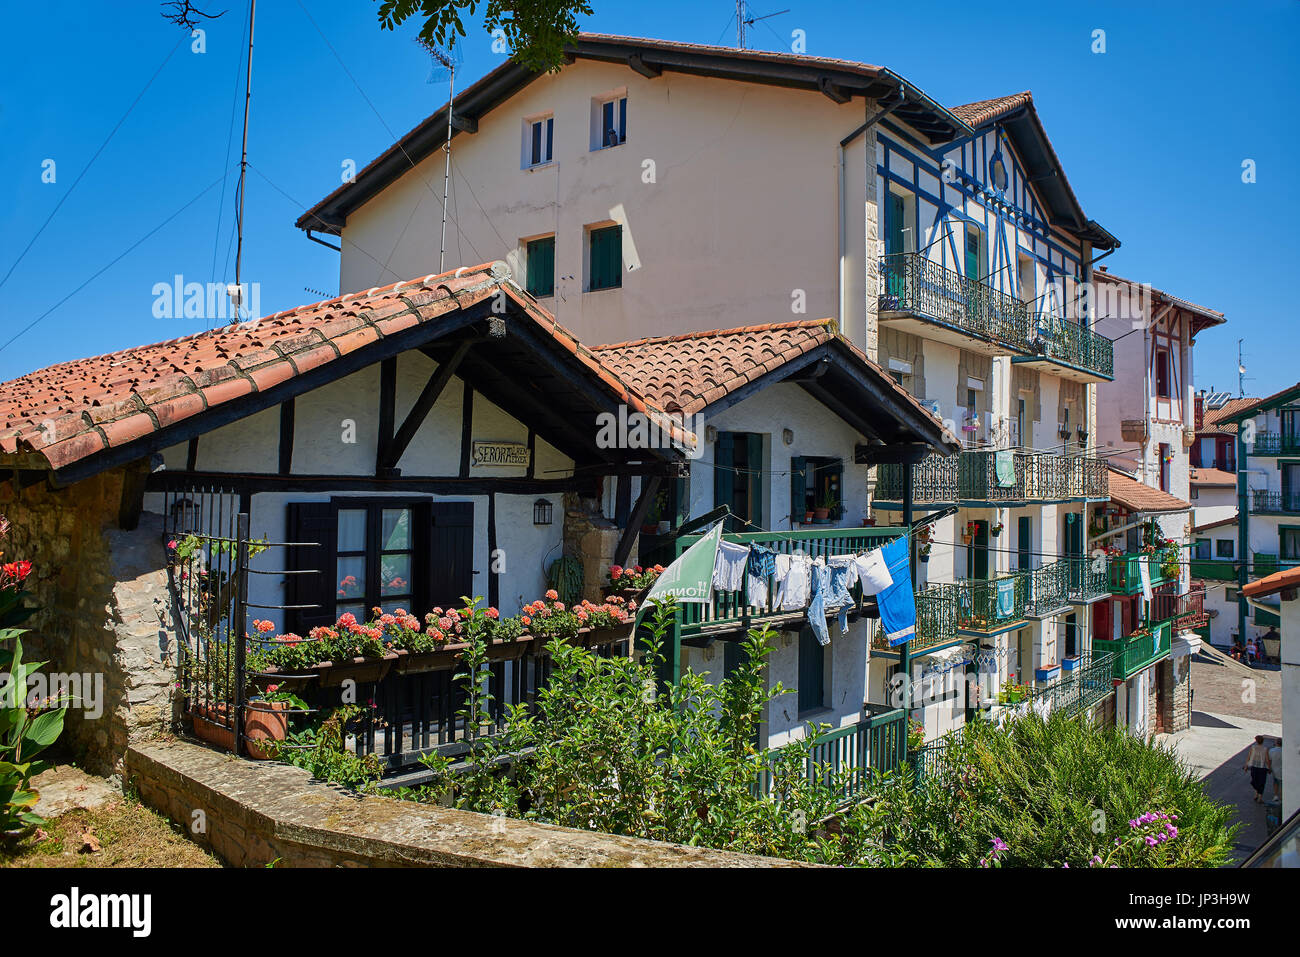 Hondarribia, Spain - July 16, 2017. Typical antique buildings in city centre of Hondarribia (Fuenterrabia), in Gipuzkoa, Basque Country, Spain. Stock Photo